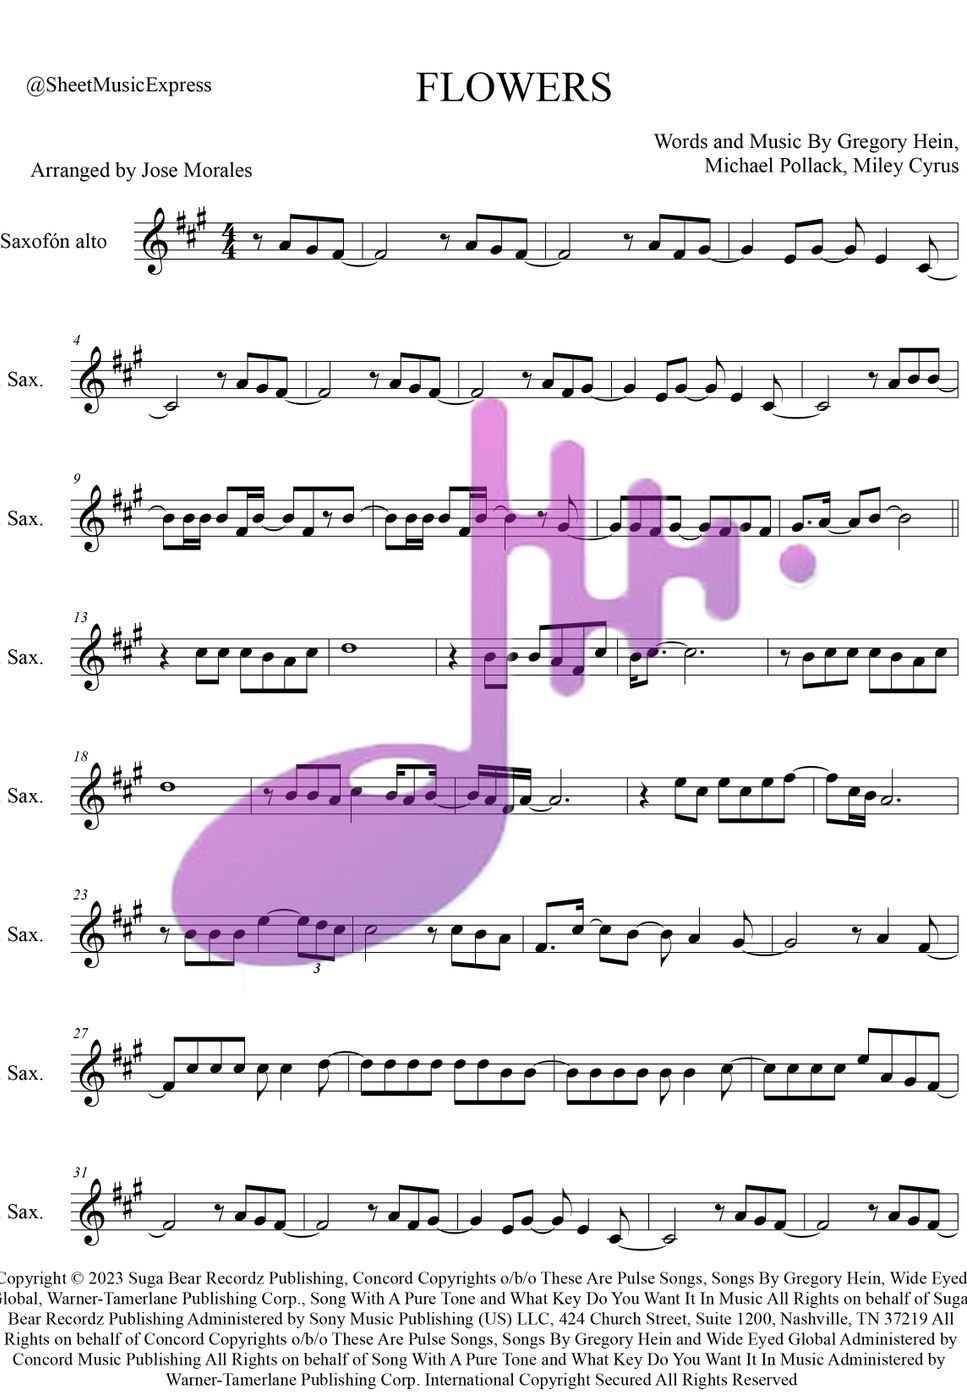 Miley Cyrus - Flowers - Miley Cyrus Alto Sax (pop) by Sheet Music Express